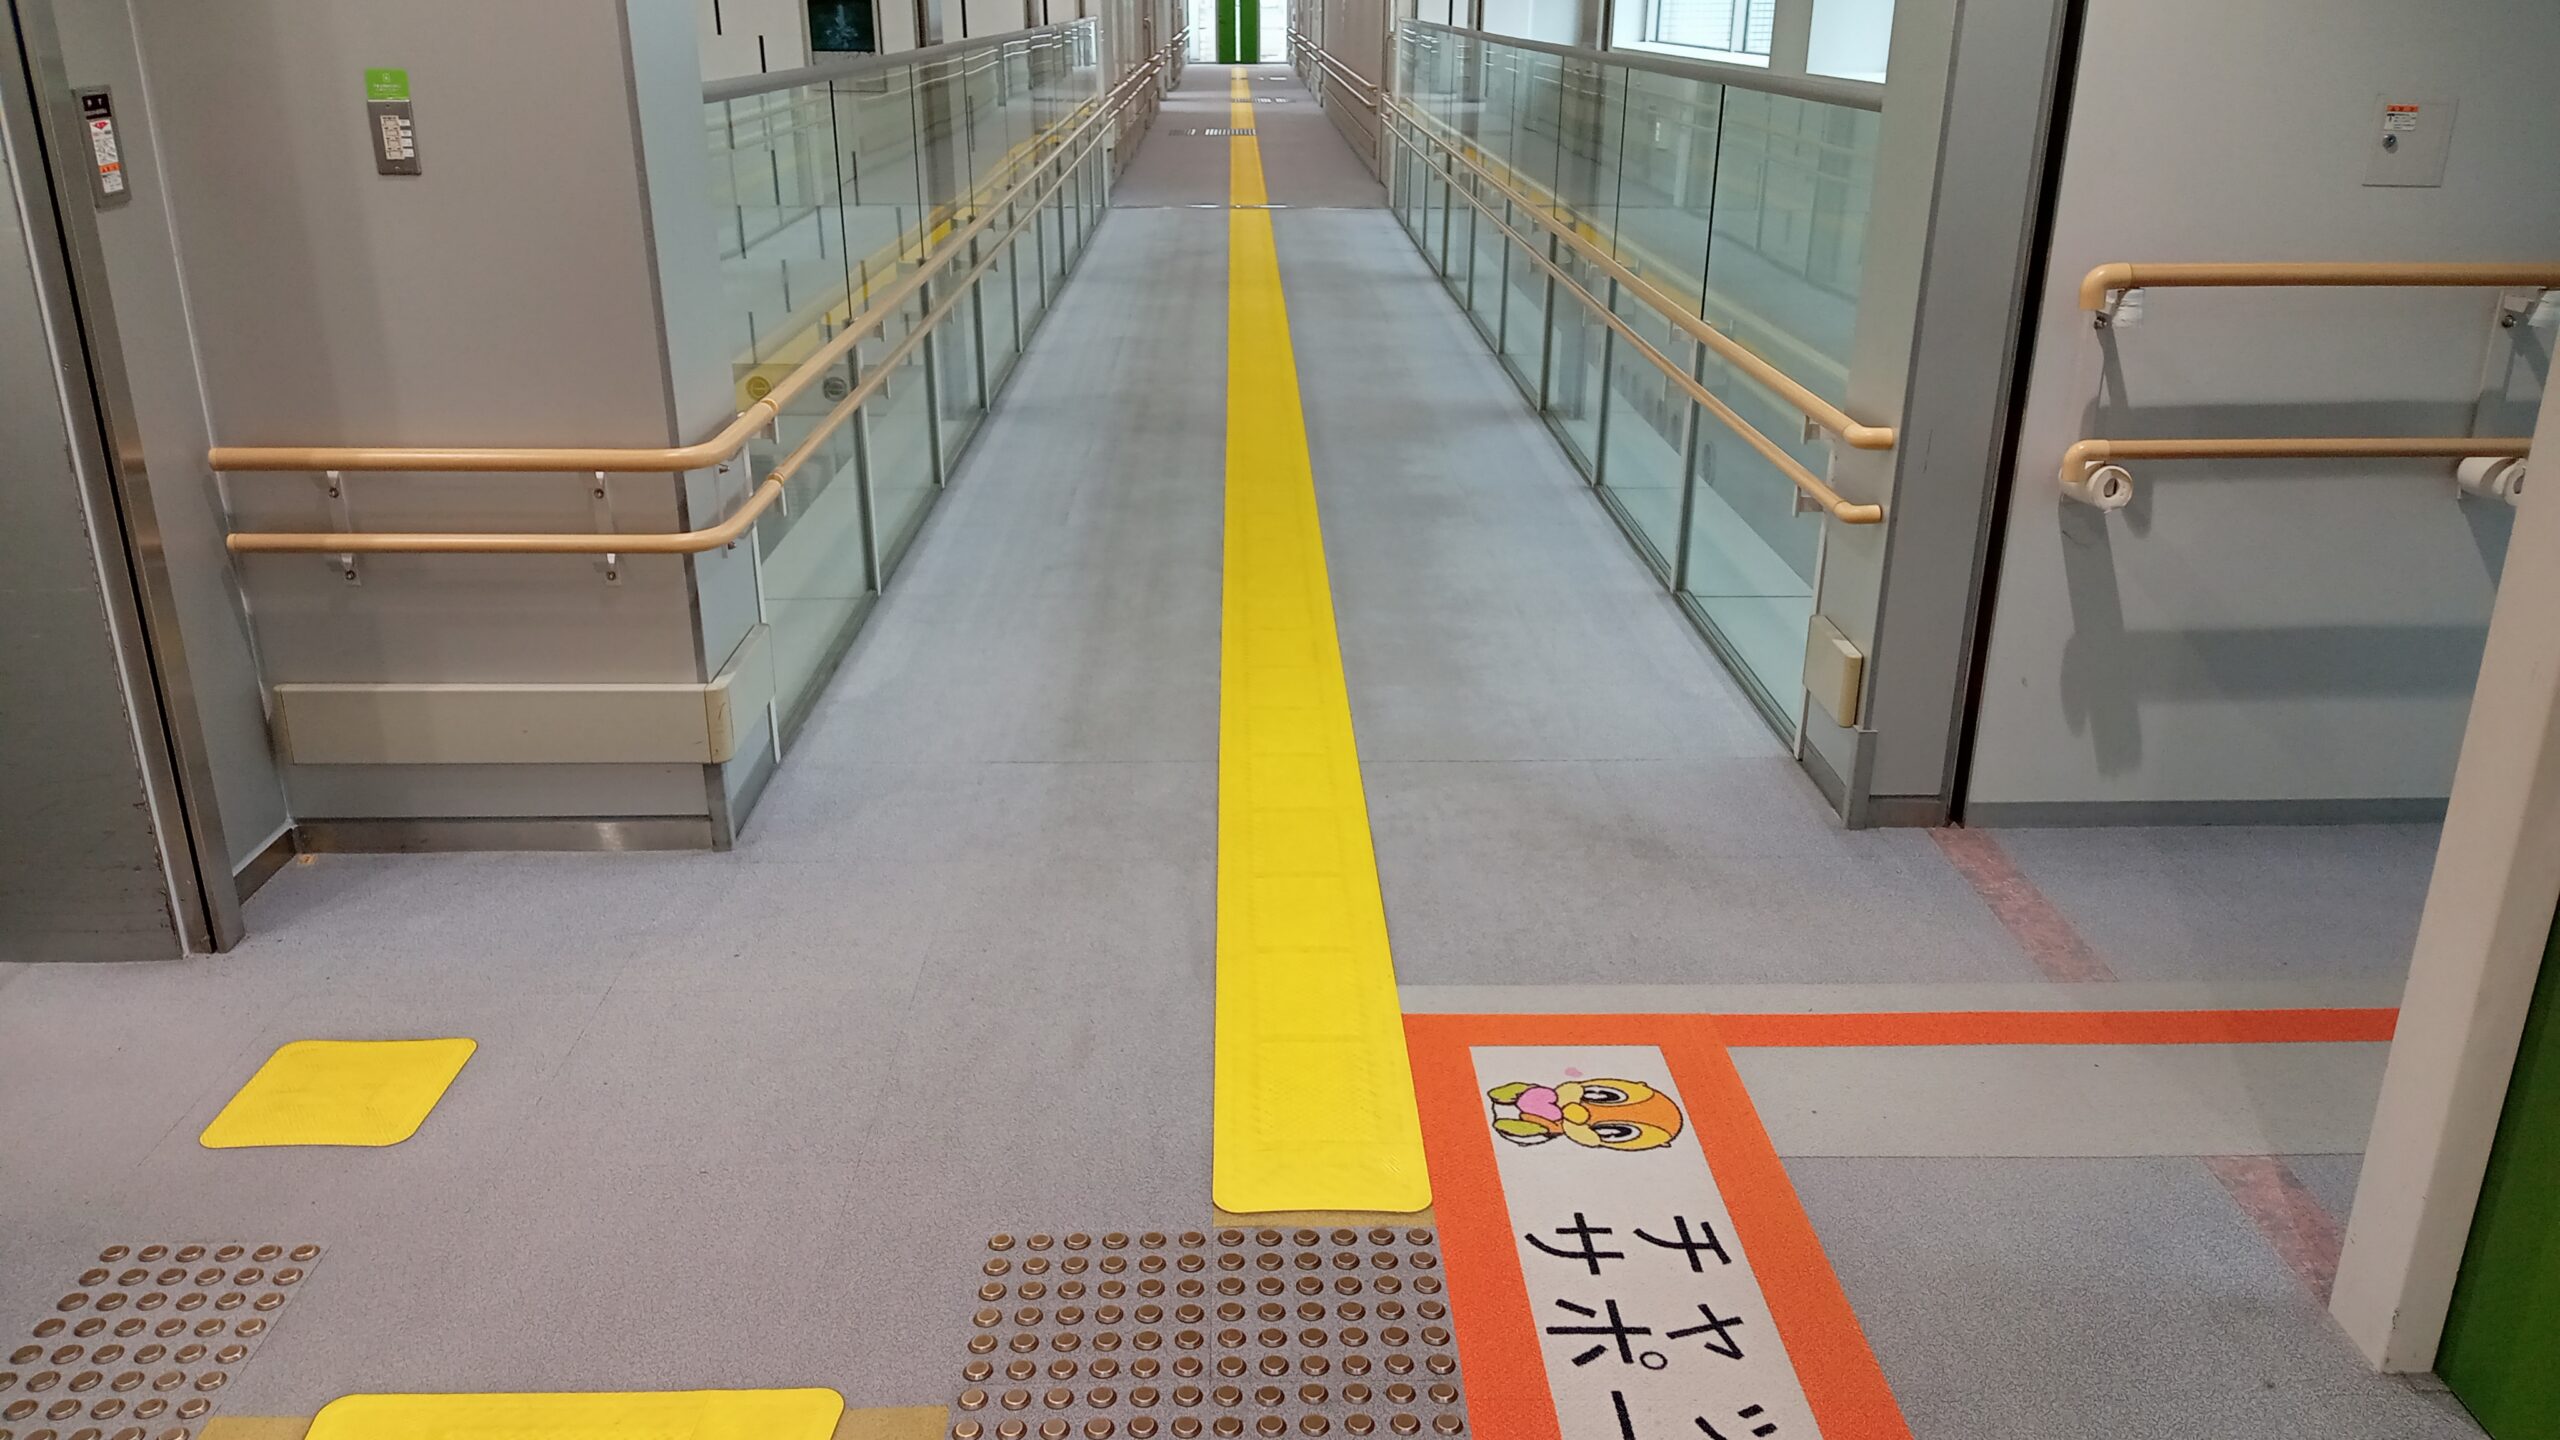 Yellow hodokun have been installed to connect the Tactile paving in the lift hall and to guide way down the corridor.